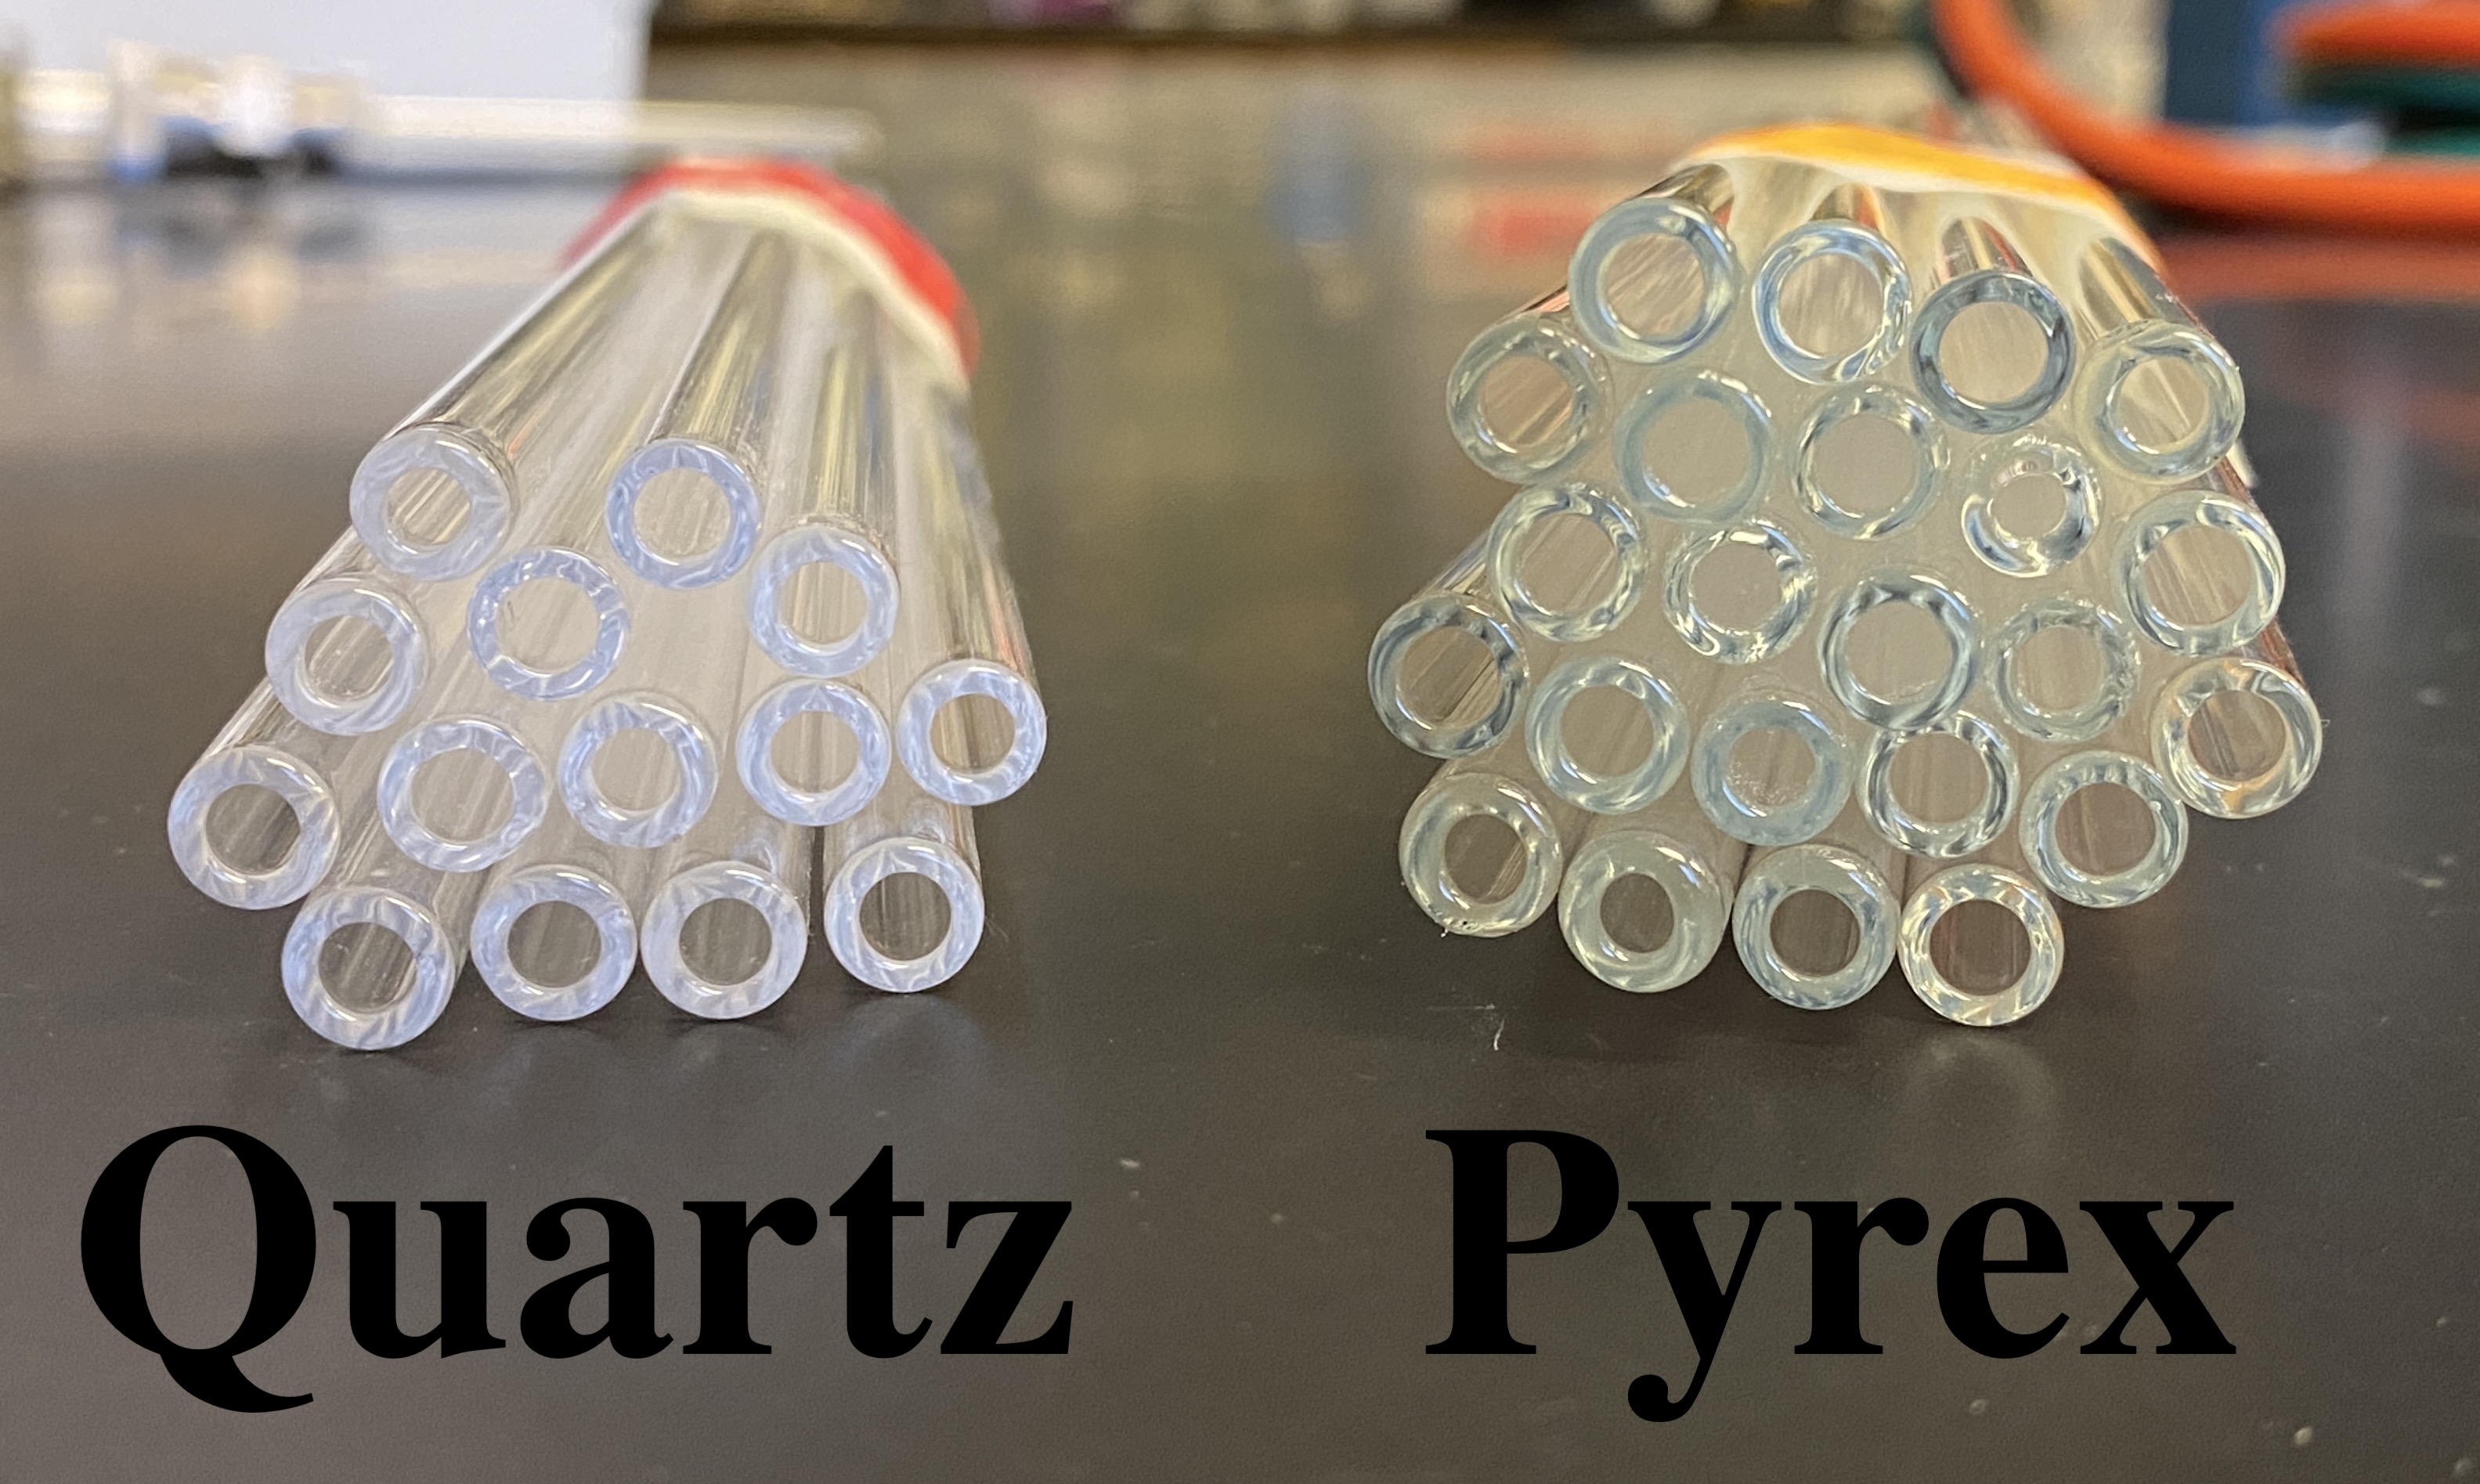 What Is the Difference Between the Two Types of Pyrex